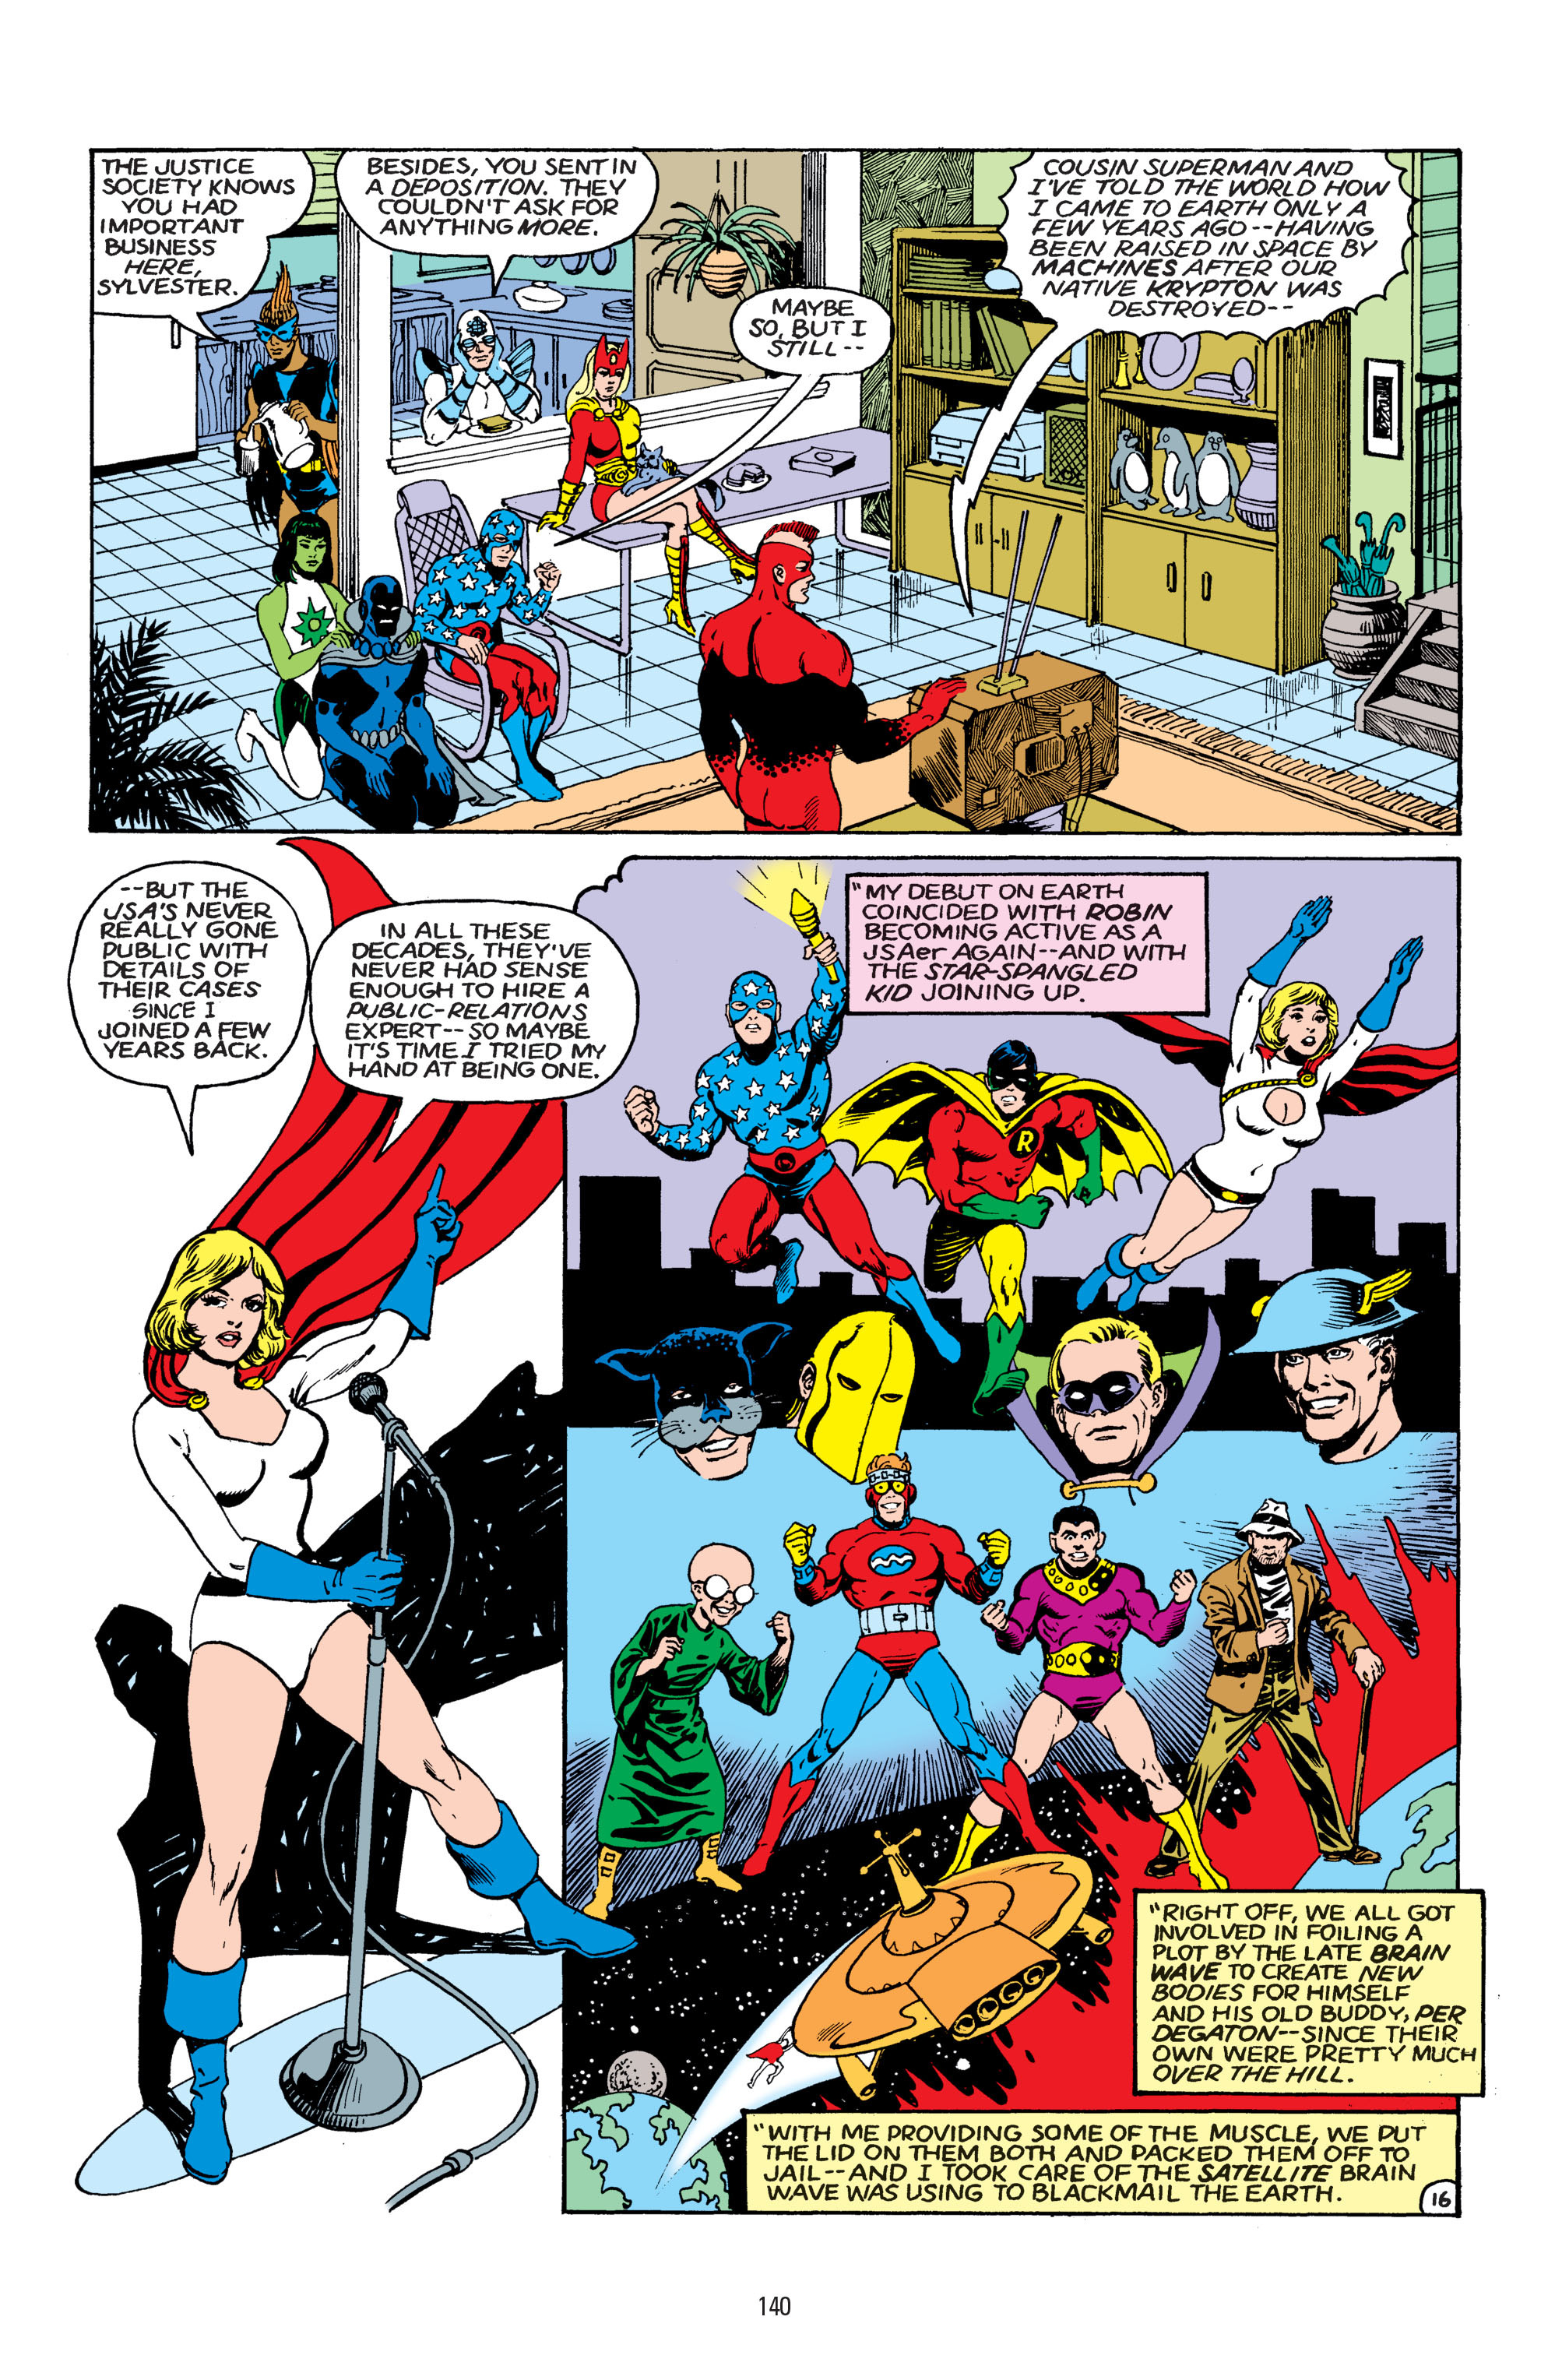 Read online America vs. the Justice Society comic -  Issue # TPB - 134